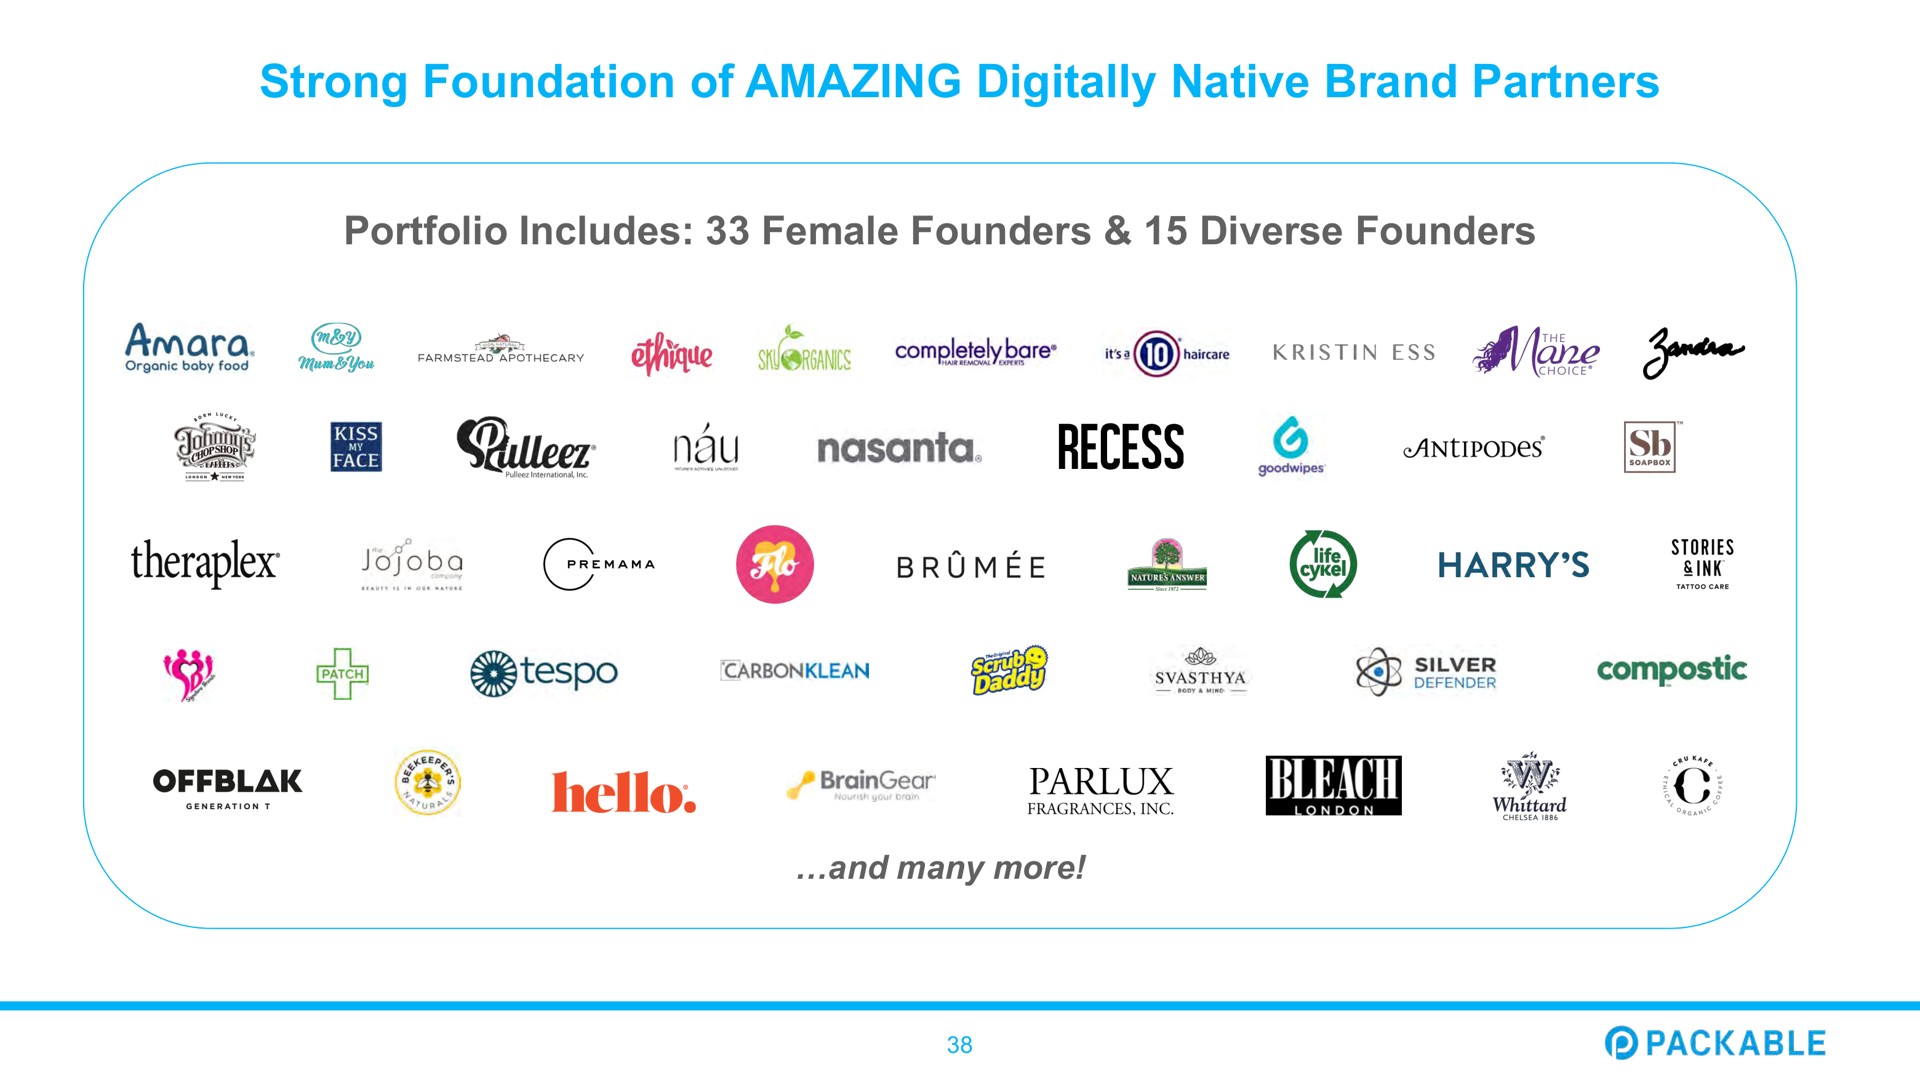 strong foundation of amazing digitally native brand partners portfolio includes female founders diverse founders recess jojoba gif harry sin silver hello packable | Packable